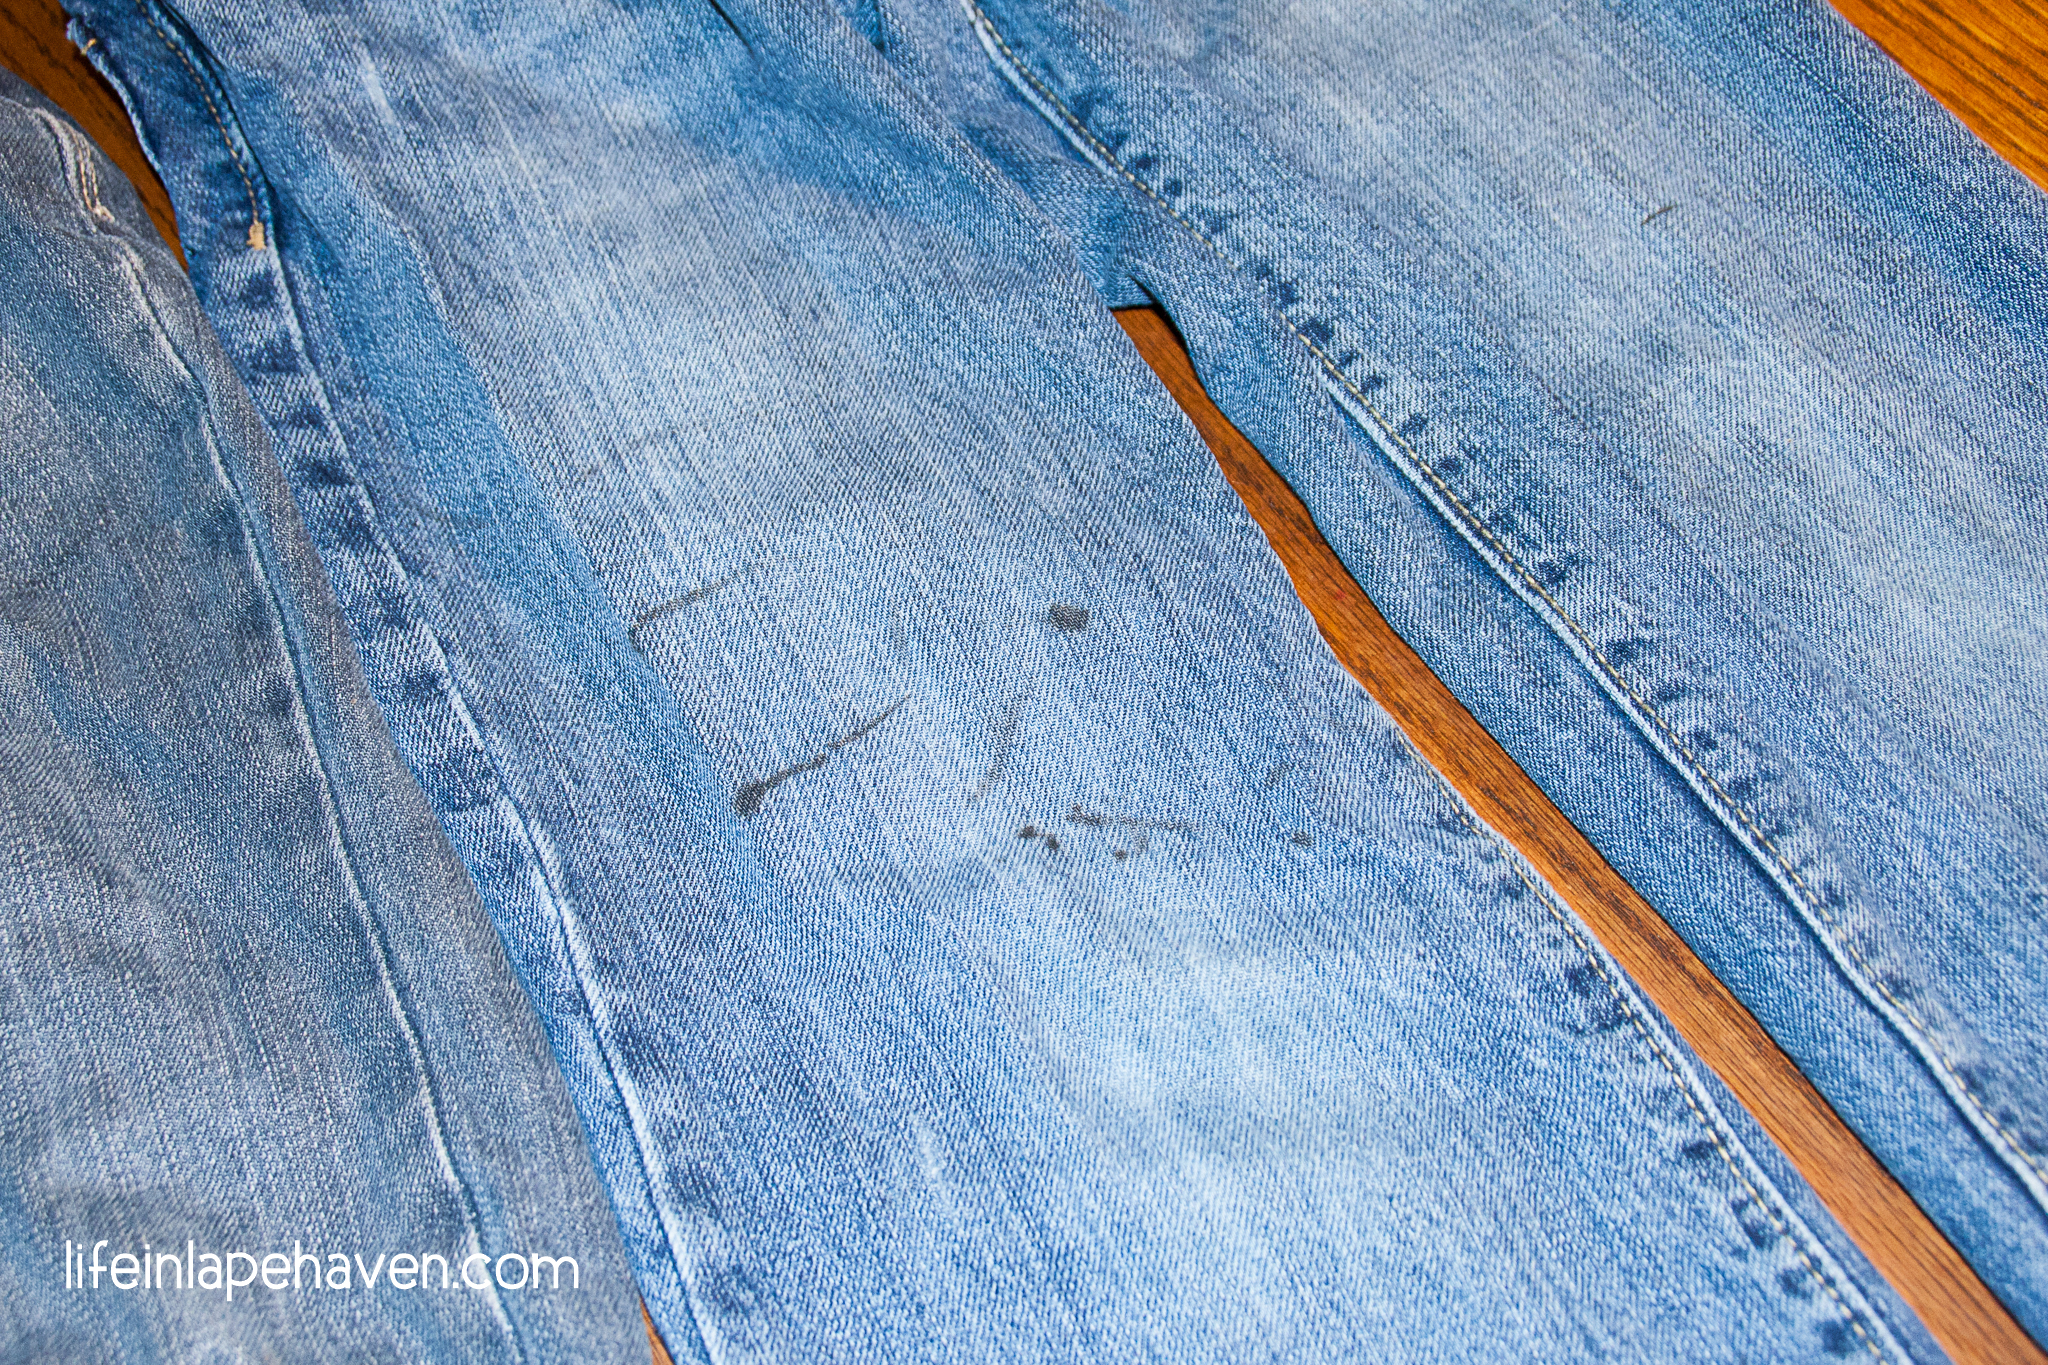 How to Get Dry Erase Marker Out of Jeans -Life in Lape Haven